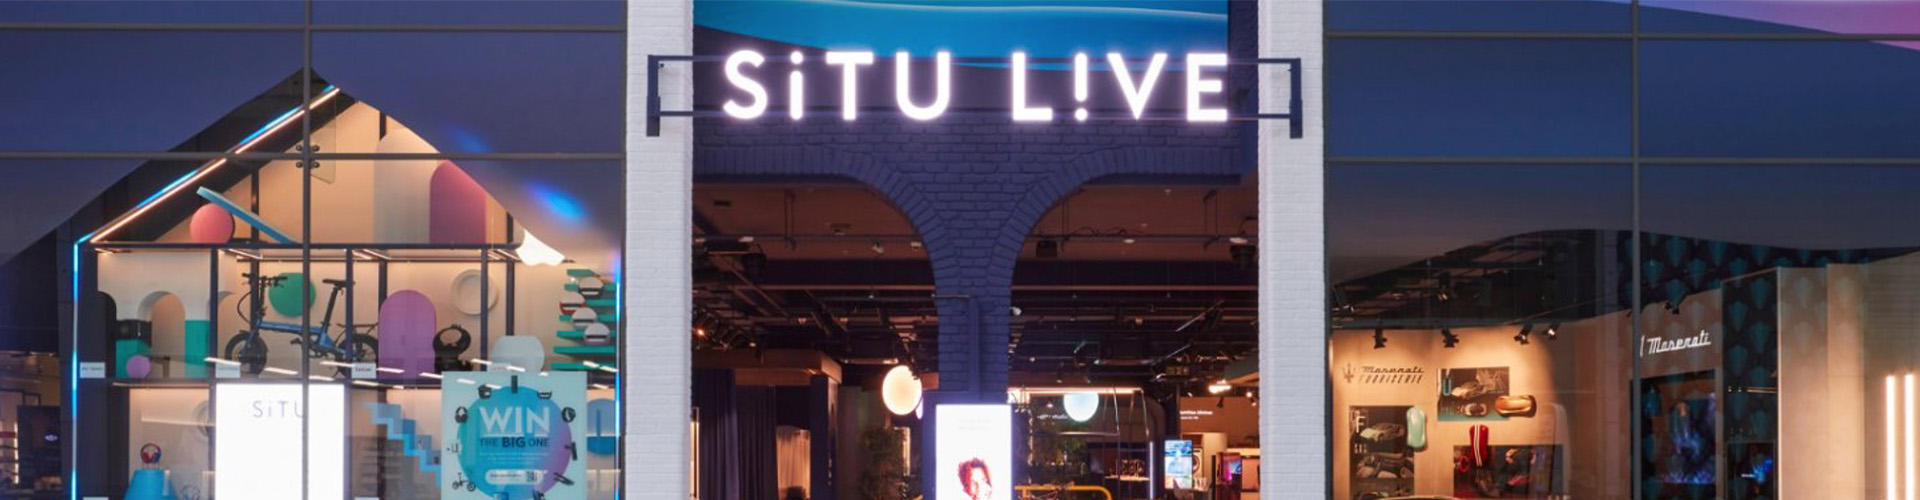 Situ Live: Retail… Storytelling… Reimagined. Report banner featuring storefront of Situ Live store